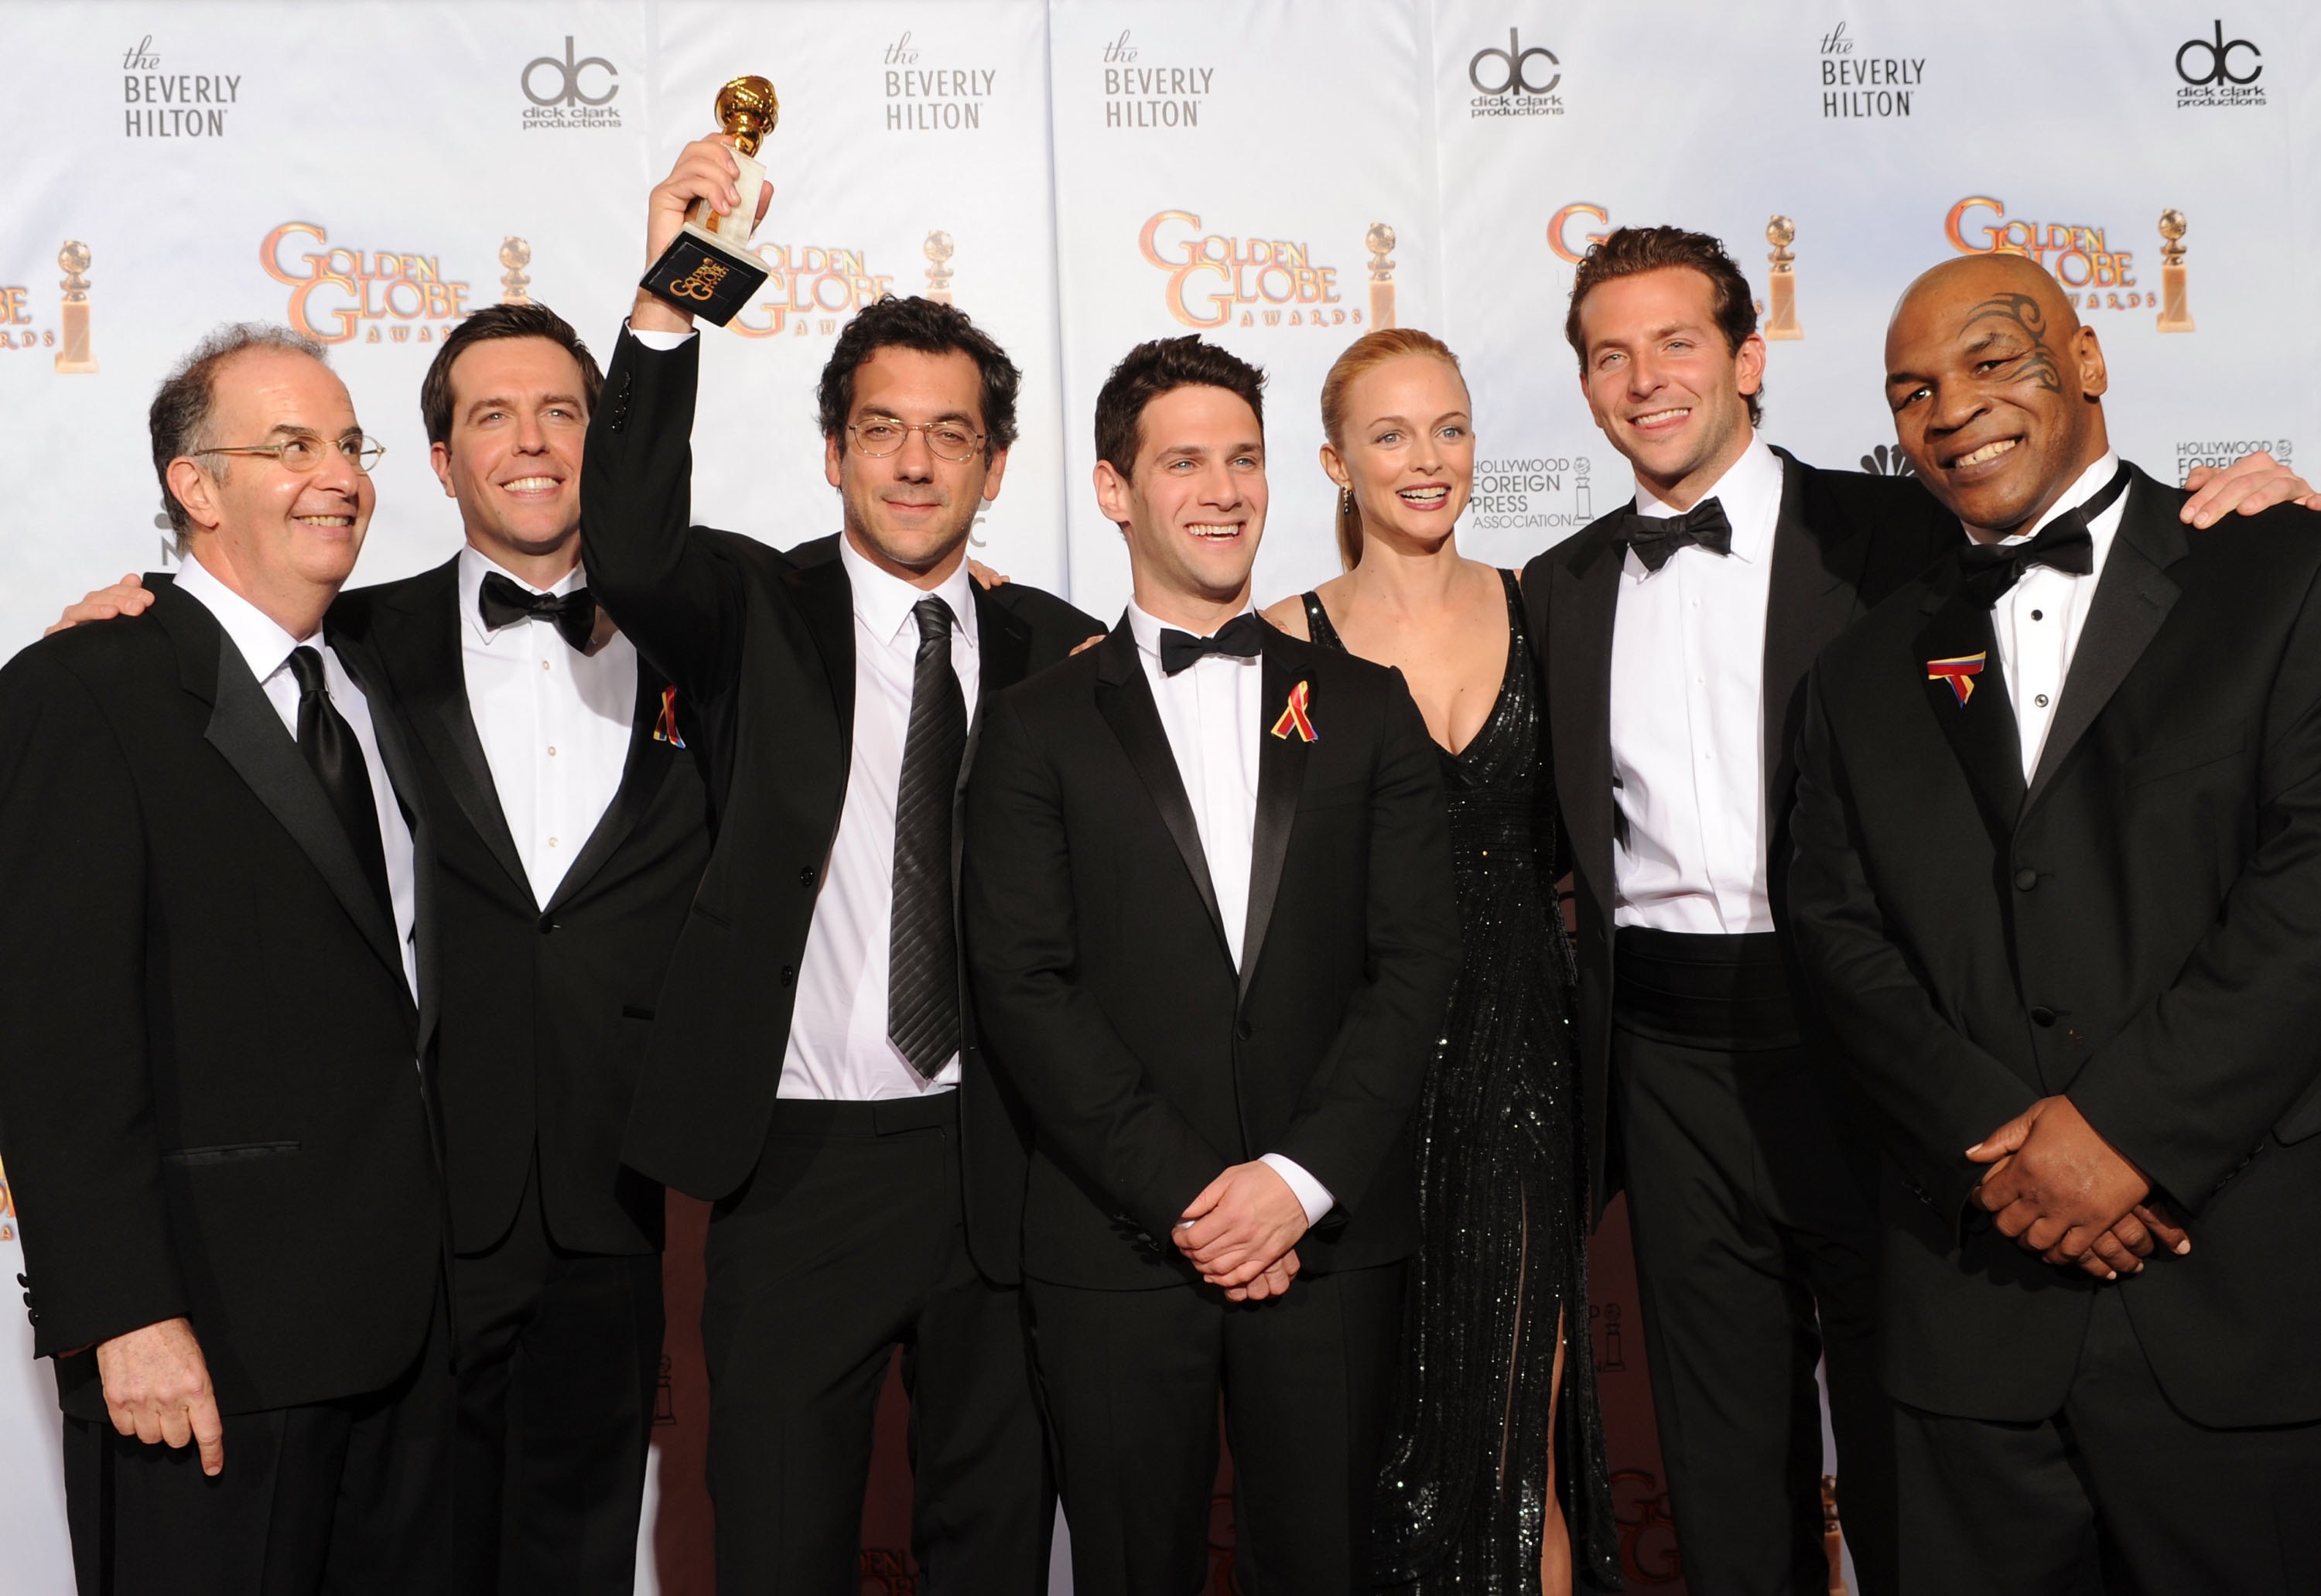 BEVERLY HILLS, CA - JANUARY 17:  (L-R) Actors Ed Helms, Justin Bartha, director Todd Phillips, actress Heather Graham, actor Bradley Cooper and former heavyweight boxer Mike Tyson pose in the press room with the Best Motion Picture Comedy or Musical award